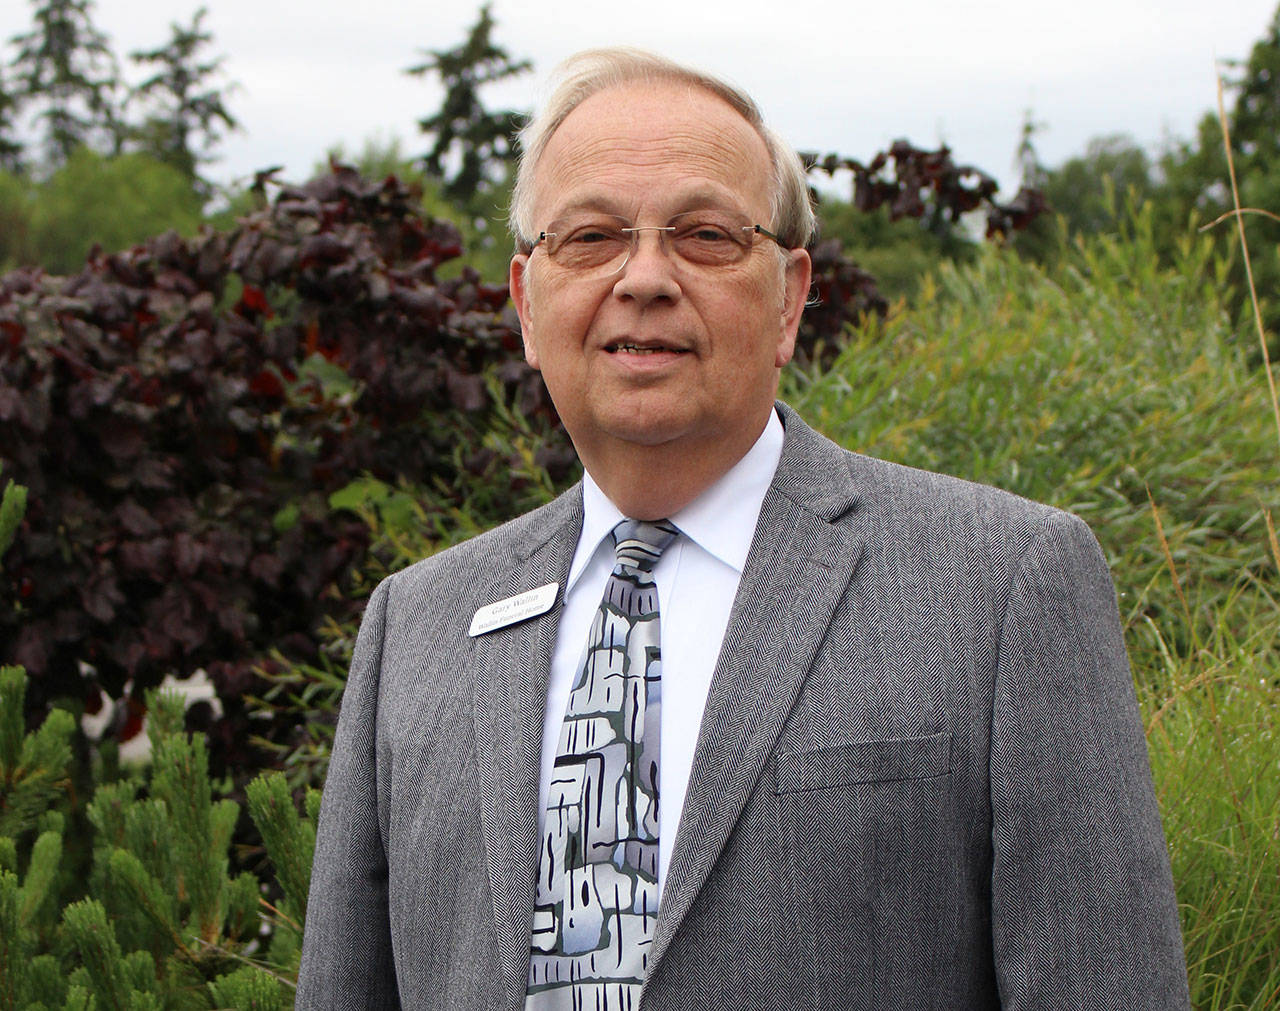 Gary Wallin, longtime businessman and funeral director in Oak Harbor who was devoted to community service, died unexpectedly Tuesday at the age of 68. Whidbey News-Times file photo